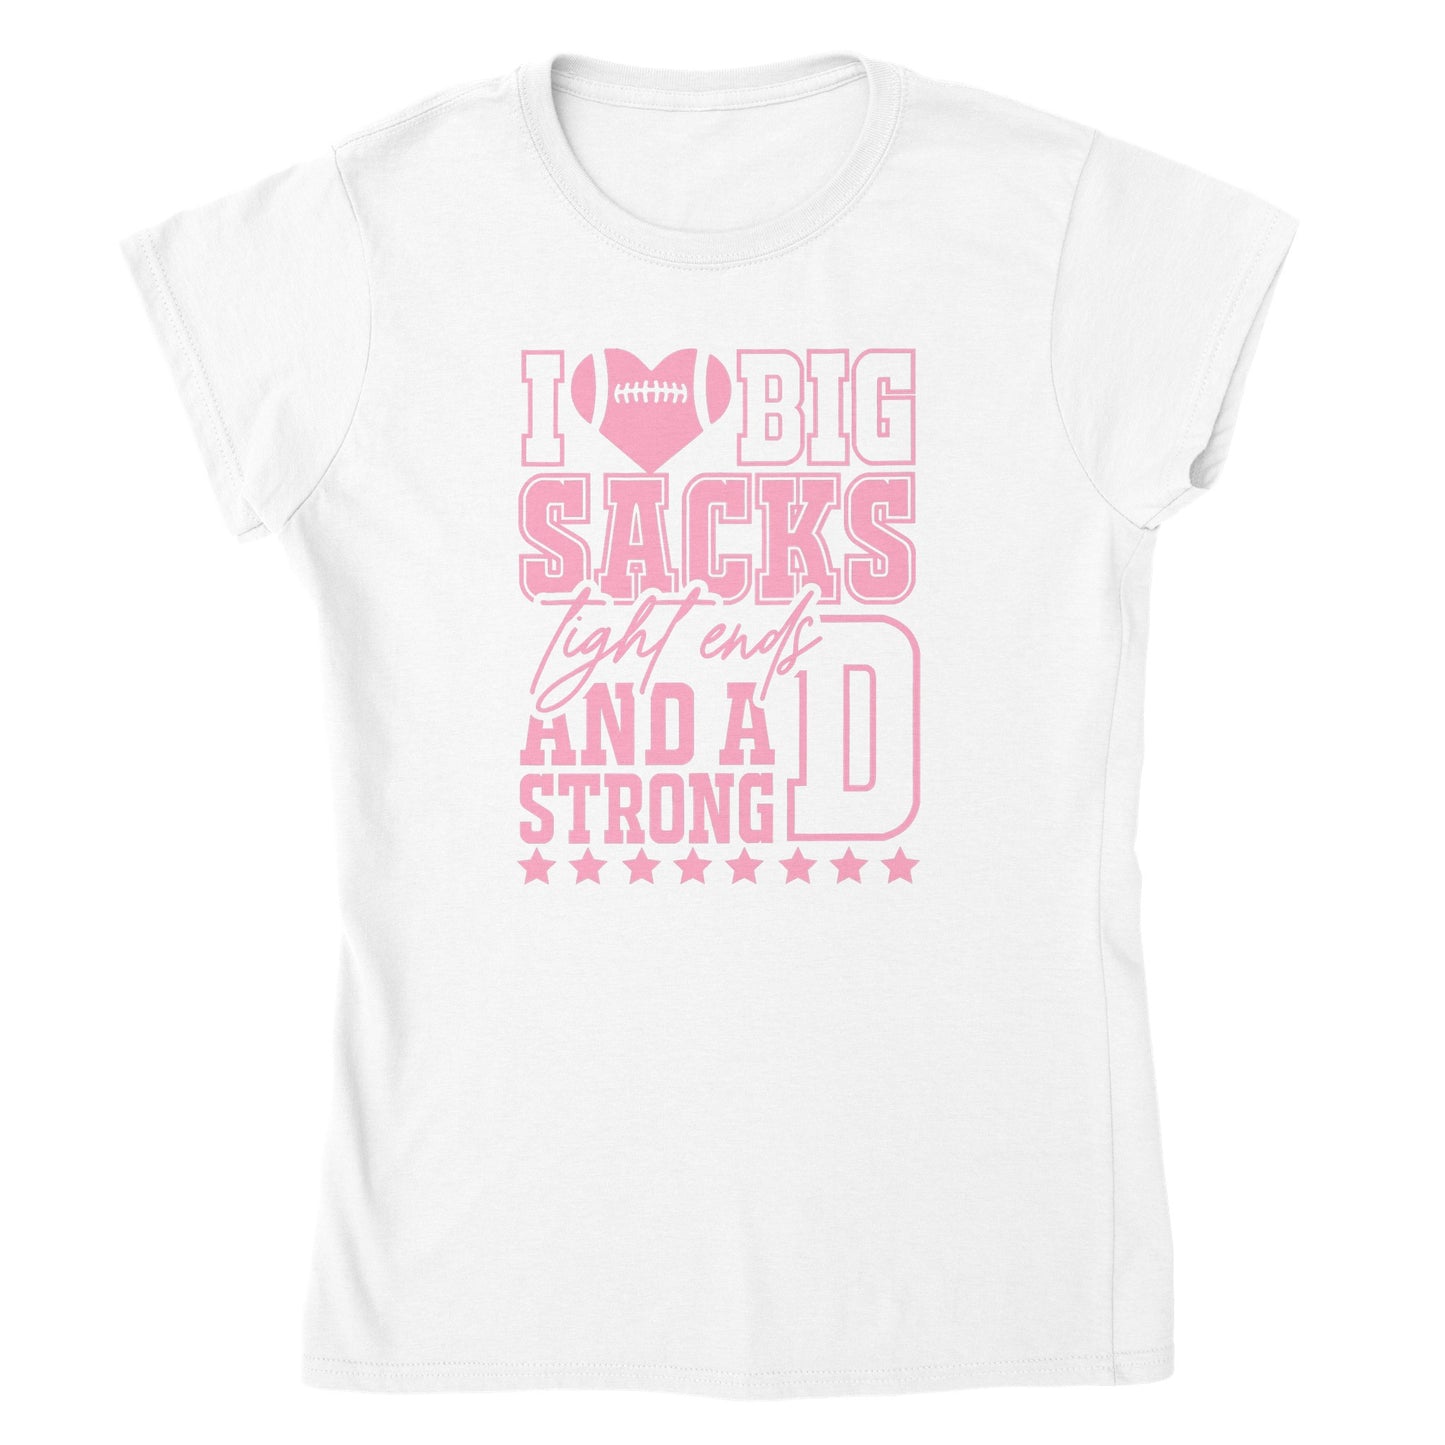 I Love Big Sacks, Tight Ends, and a Strong D Womens T-shirt - Mister Snarky's